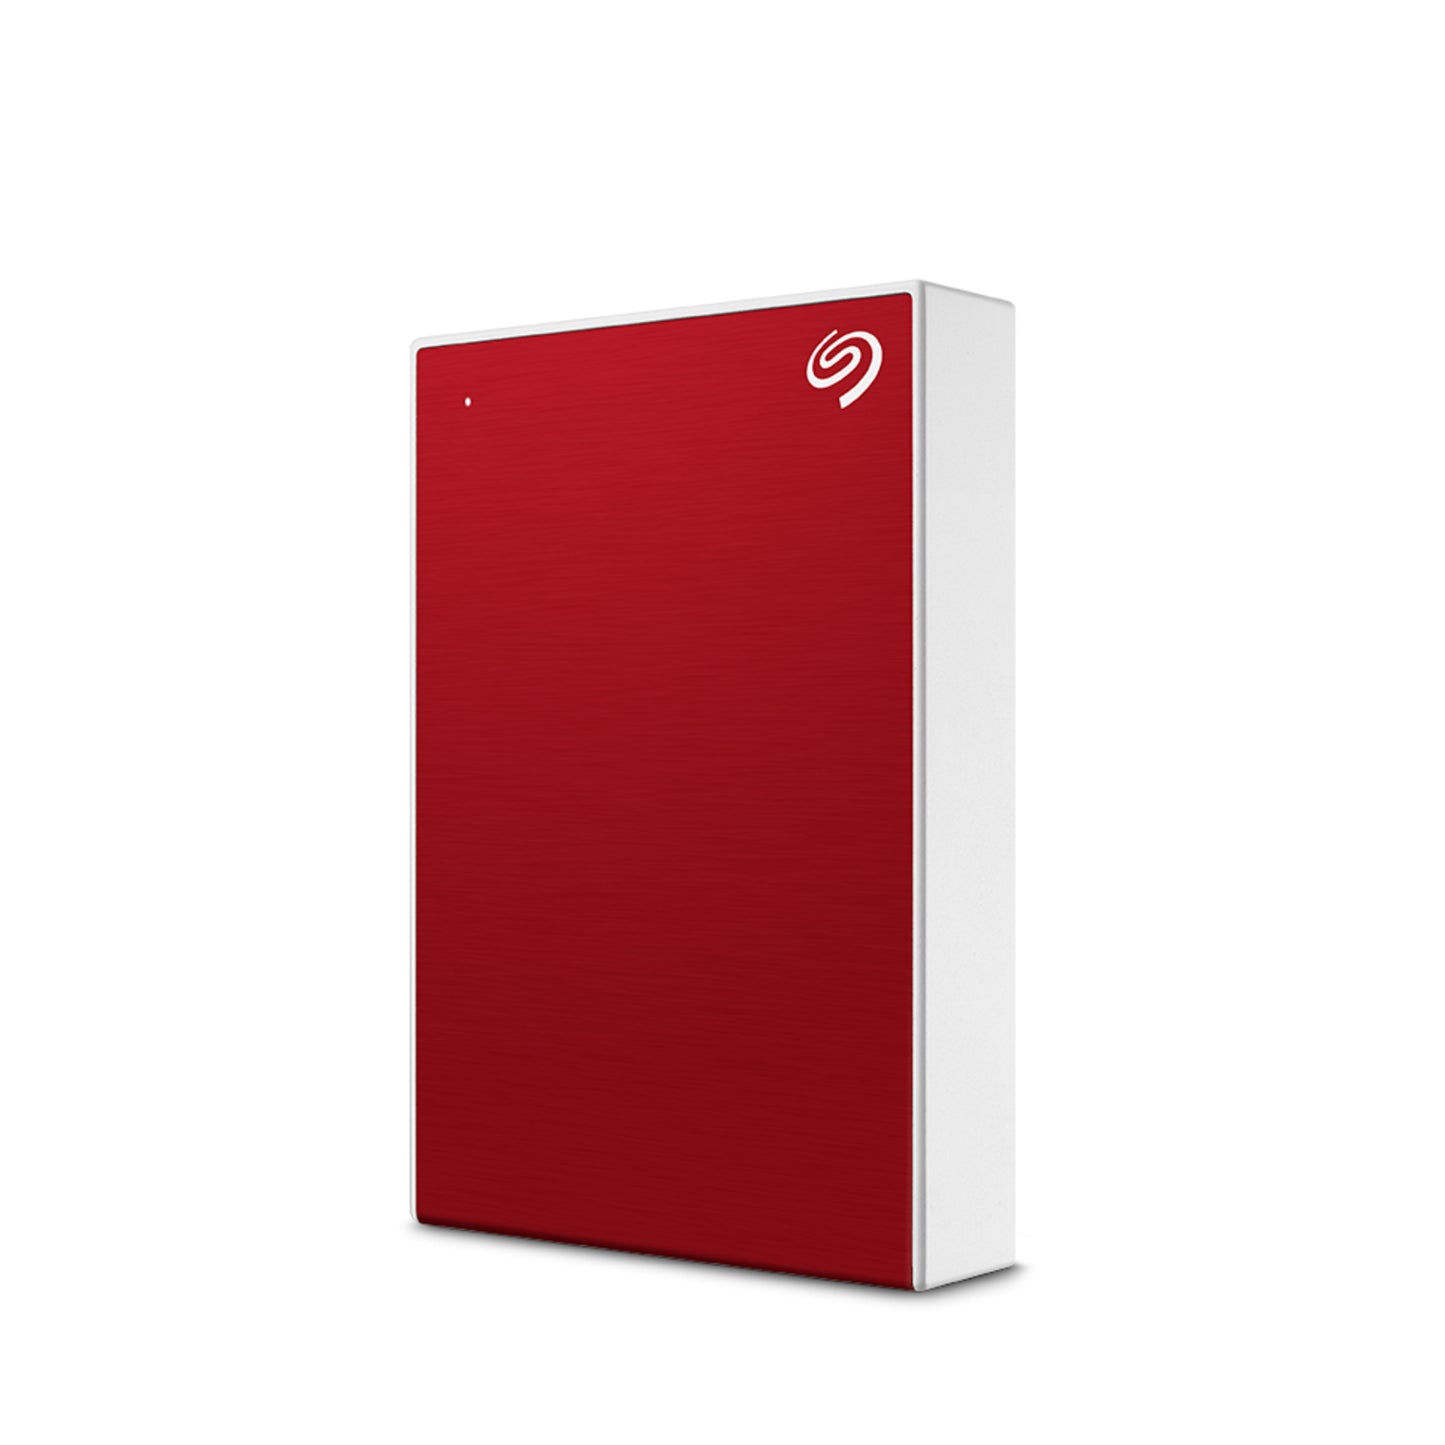 SEAGATE One Touch Slim USB 3.0 2TB - Red